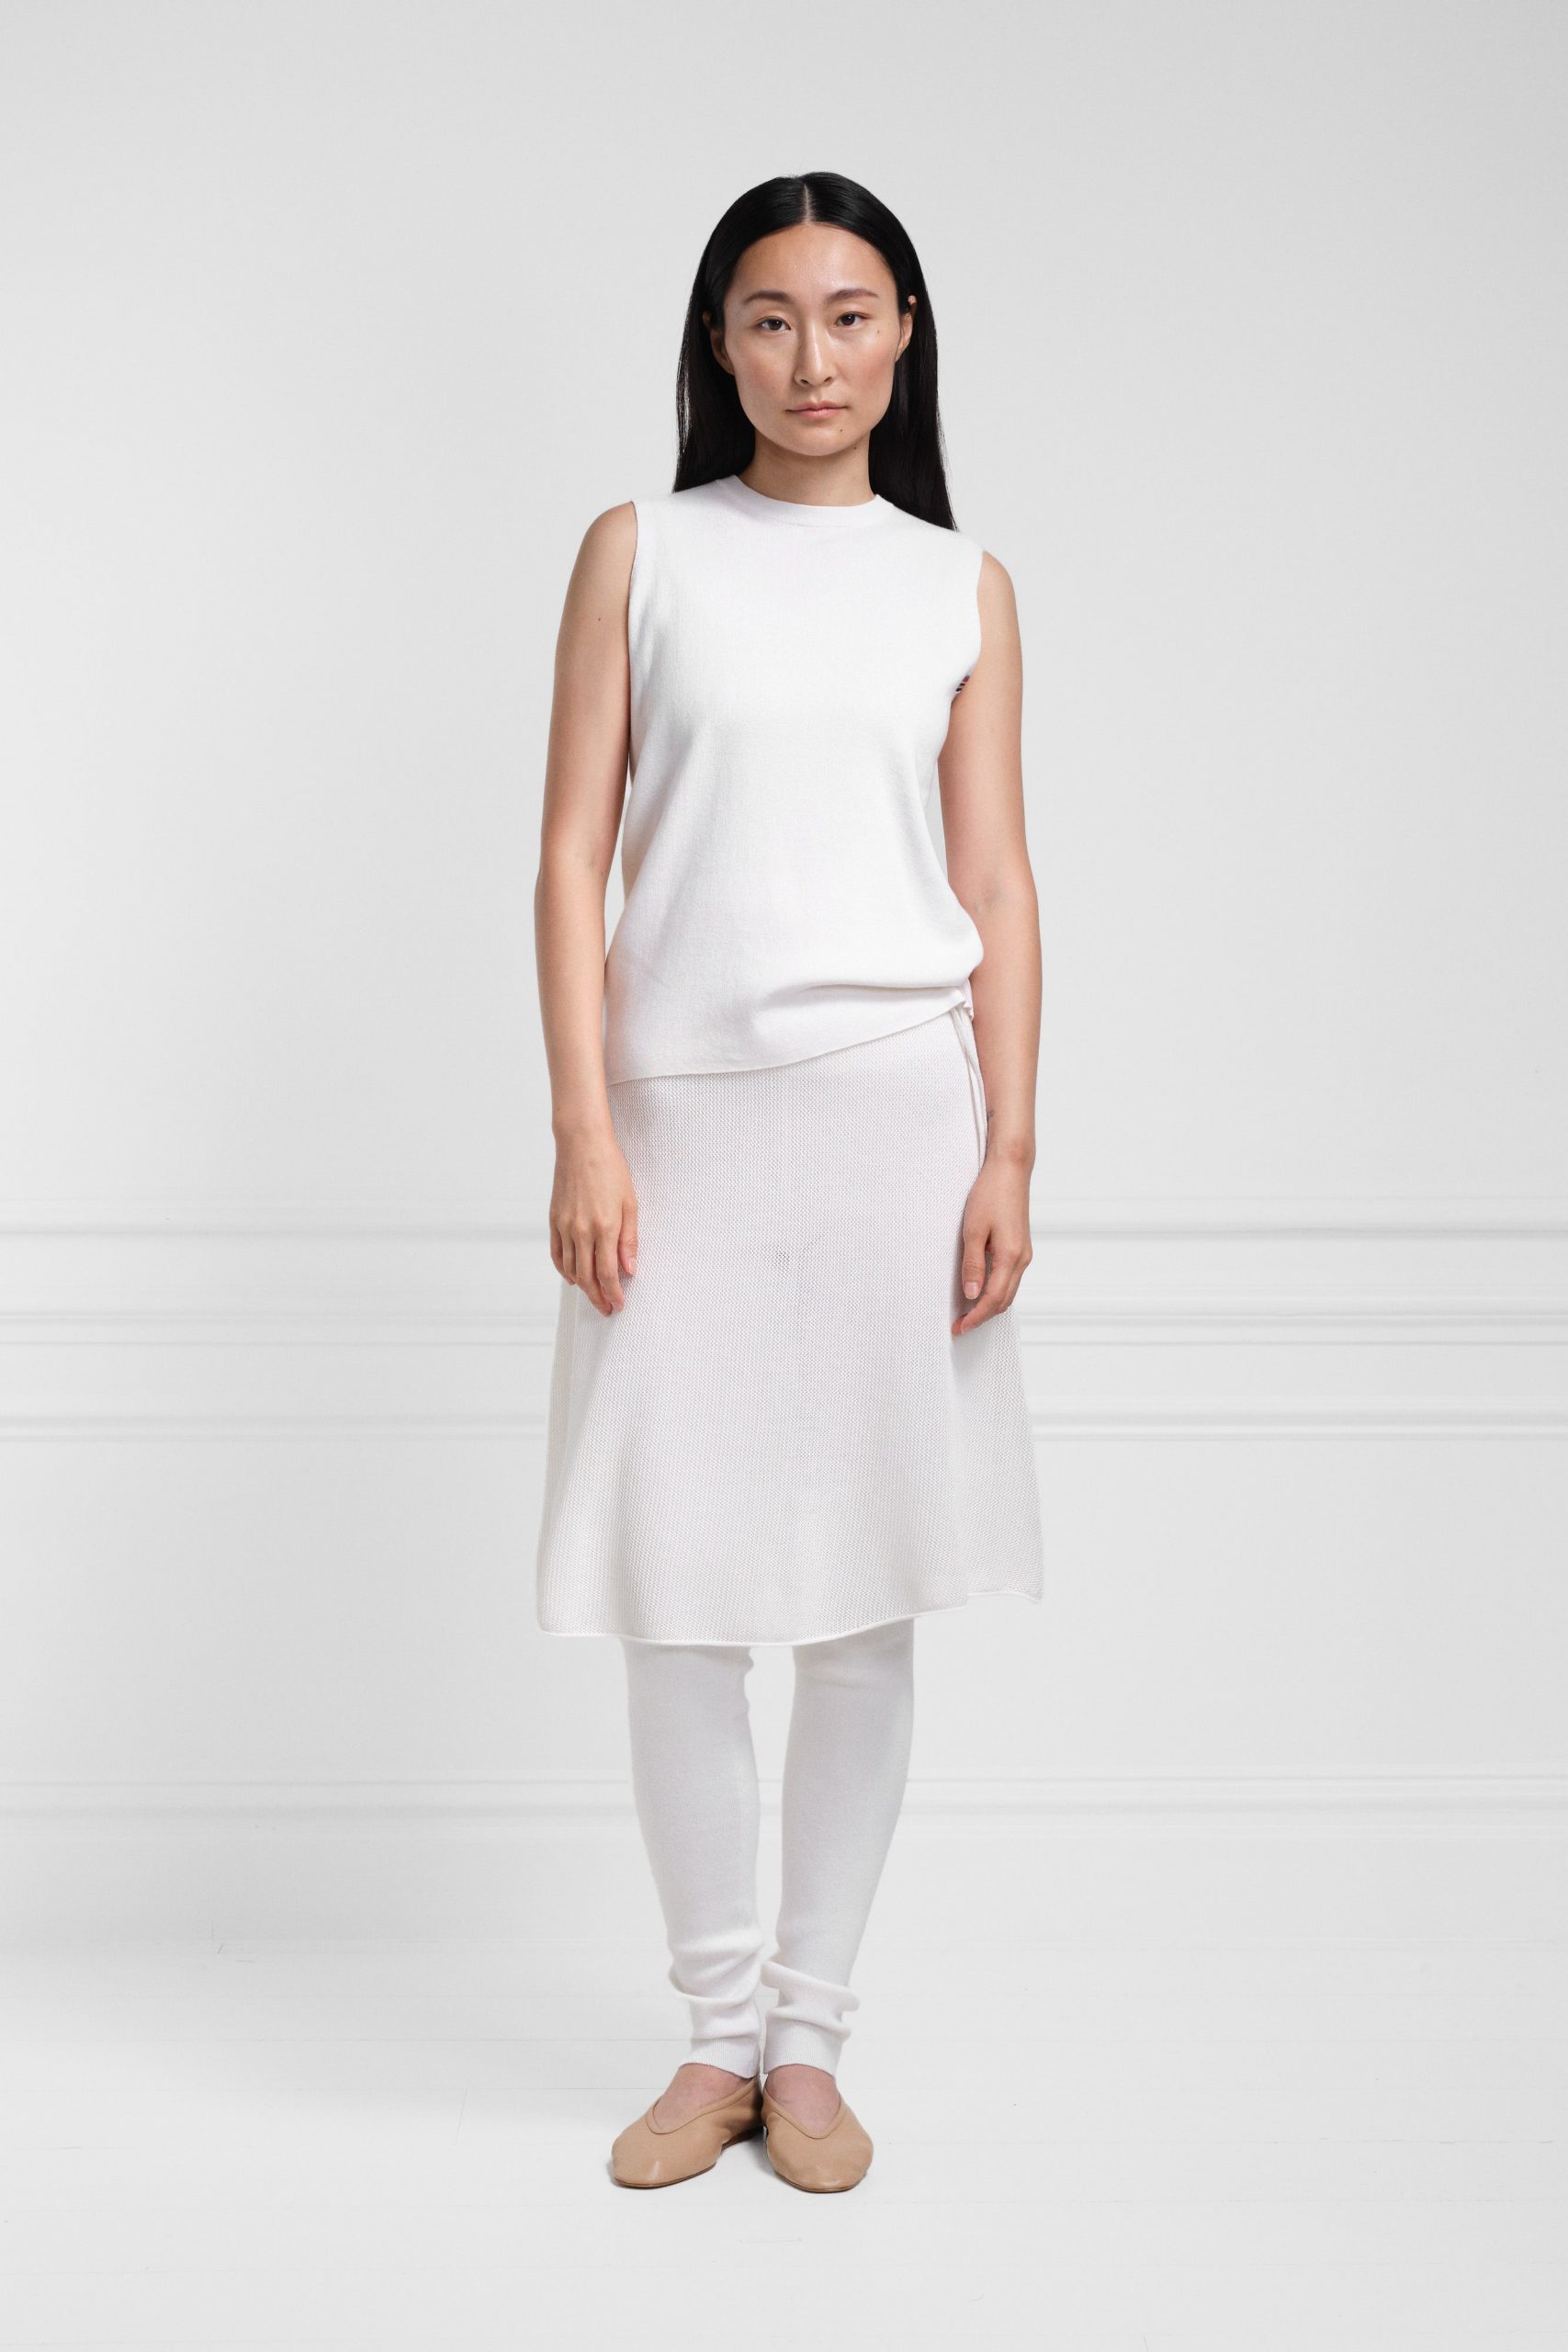 Only 116.00 usd for No 297 Natasja Mesh Skirt Online at the Shop